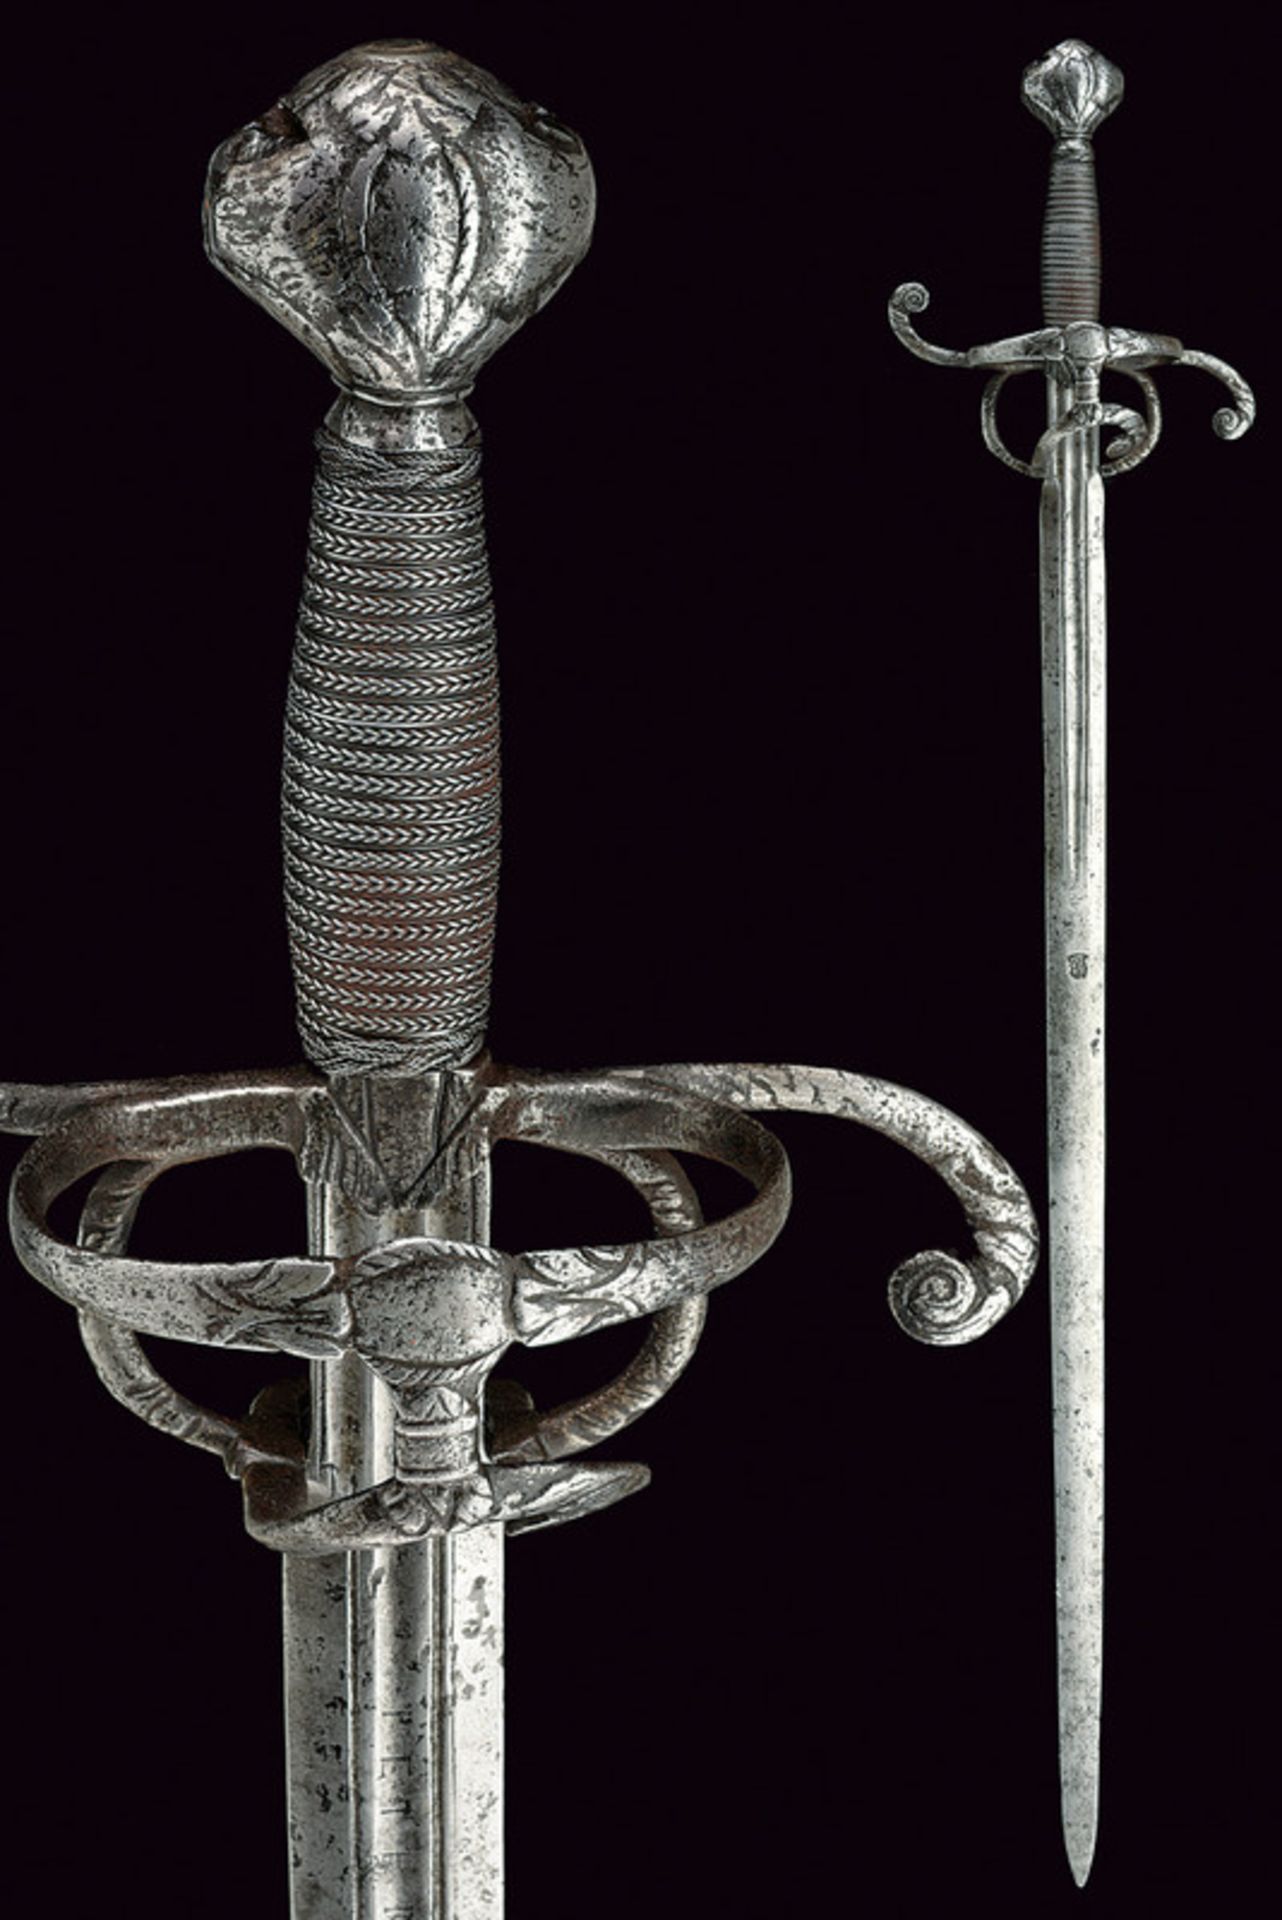 A rapier dating: late 16th Century provenance: Germany Straight blade with two slightly converging